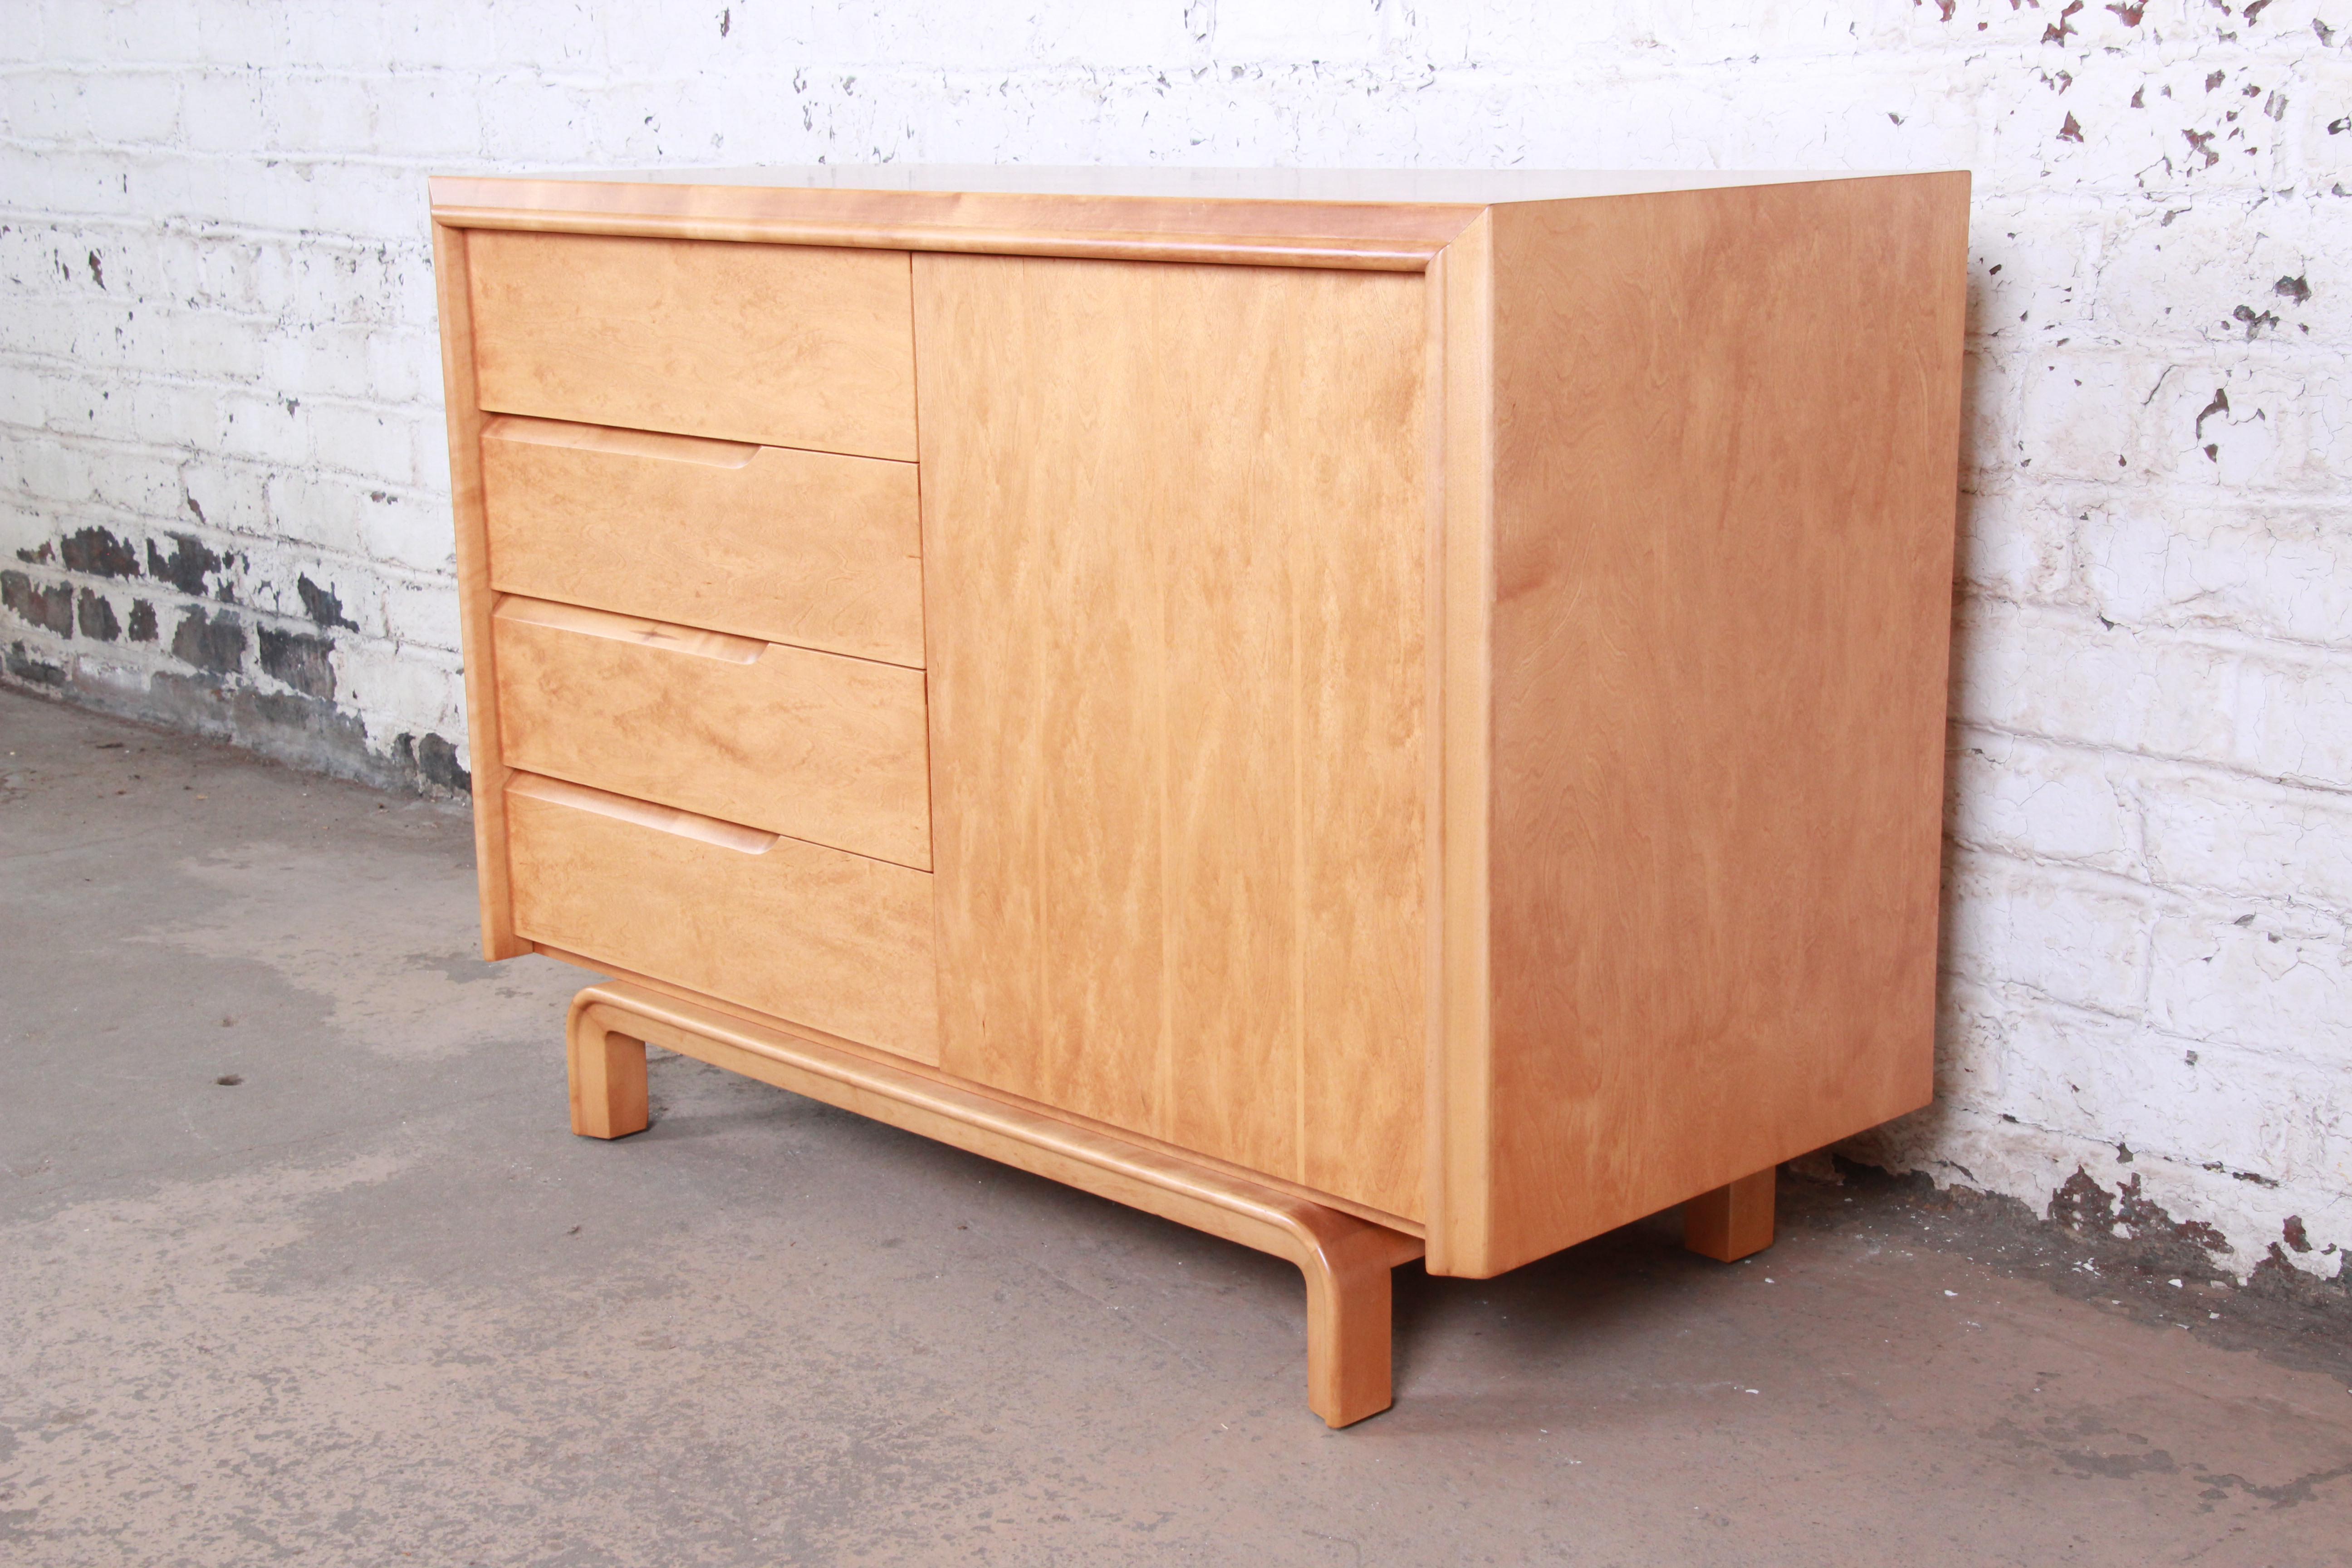 An exceptional Mid-Century Modern maple sideboard or credenza designed by Edmond Spence. The credenza features gorgeous maple wood grain and sleek Scandinavian design. It offers ample storage, with four deep dovetailed drawers on the left and a